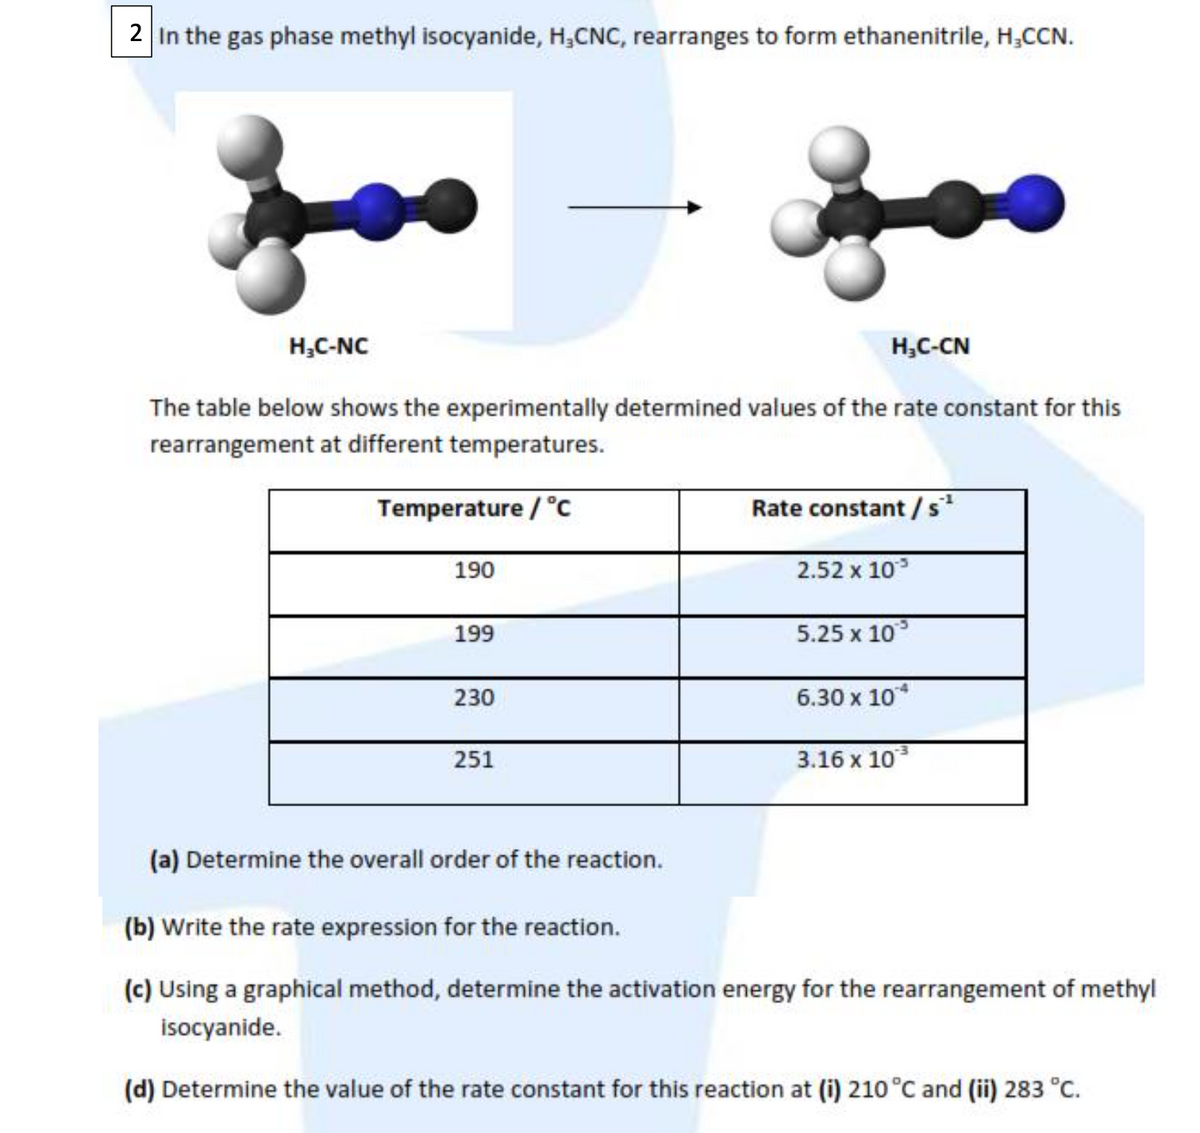 2 In the gas phase methyl isocyanide, H,CNC, rearranges to form ethanenitrile, H,CCN.
H,C-NC
H,C-CN
The table below shows the experimentally determined values of the rate constant for this
rearrangement at different temperatures.
Temperature / °c
Rate constant / s
190
2.52 x 10
199
5.25 x 10
230
6.30 х 10*
251
3.16 х 103
(a) Determine the overall order of the reaction.
(b) Write the rate expression for the reaction.
(c) Using a graphical method, determine the activation energy for the rearrangement of methyl
isocyanide.
(d) Determine the value of the rate constant for this reaction at (i) 210 °C and (ii) 283 °C.
